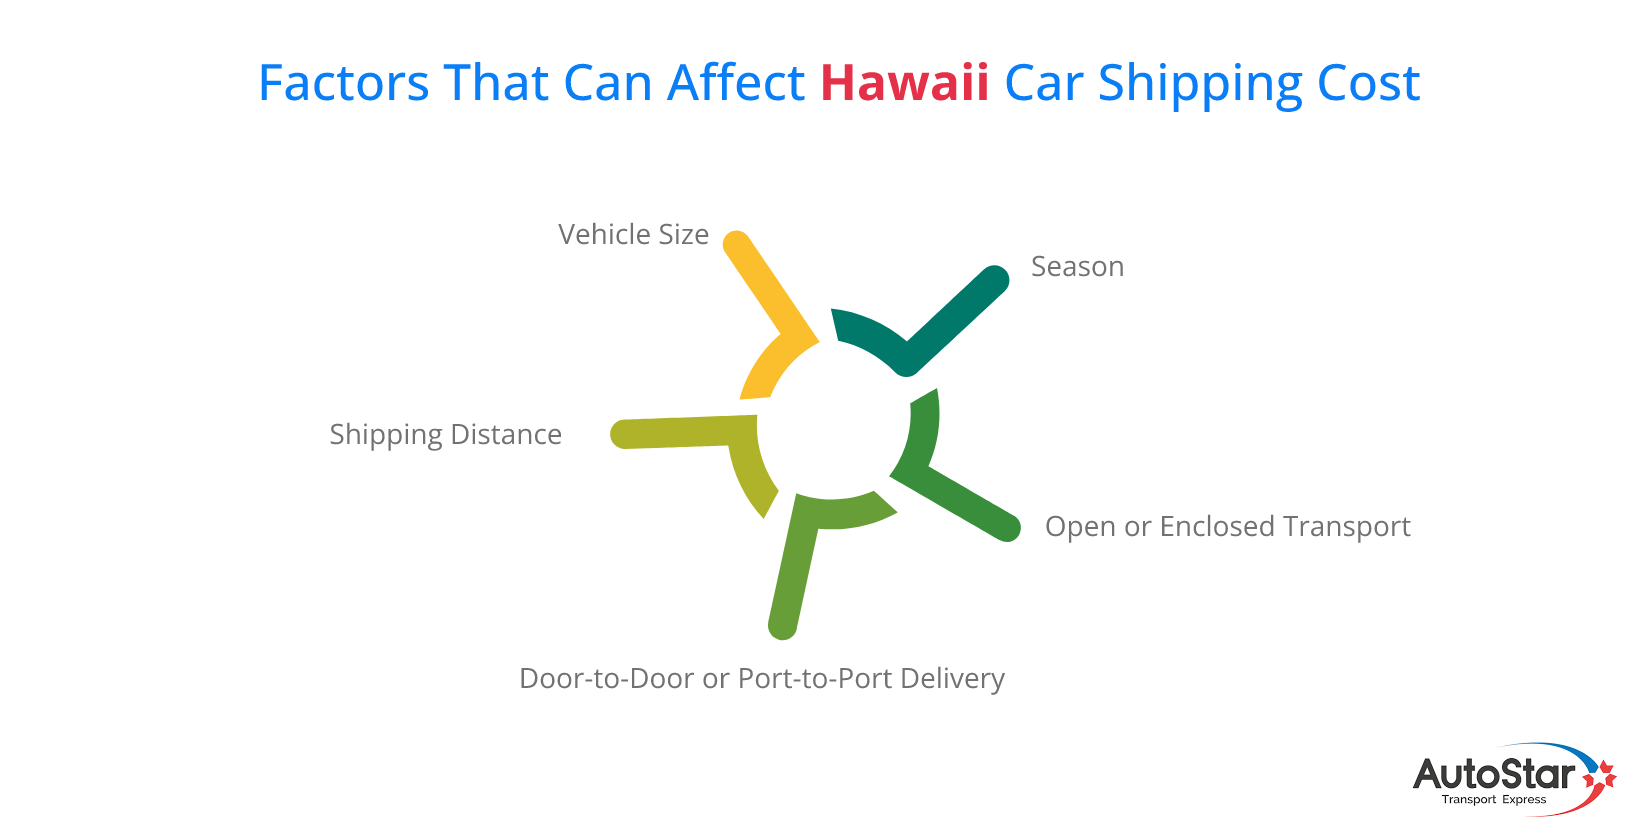 Factors That Can Affect Hawaii Car Shipping Cost